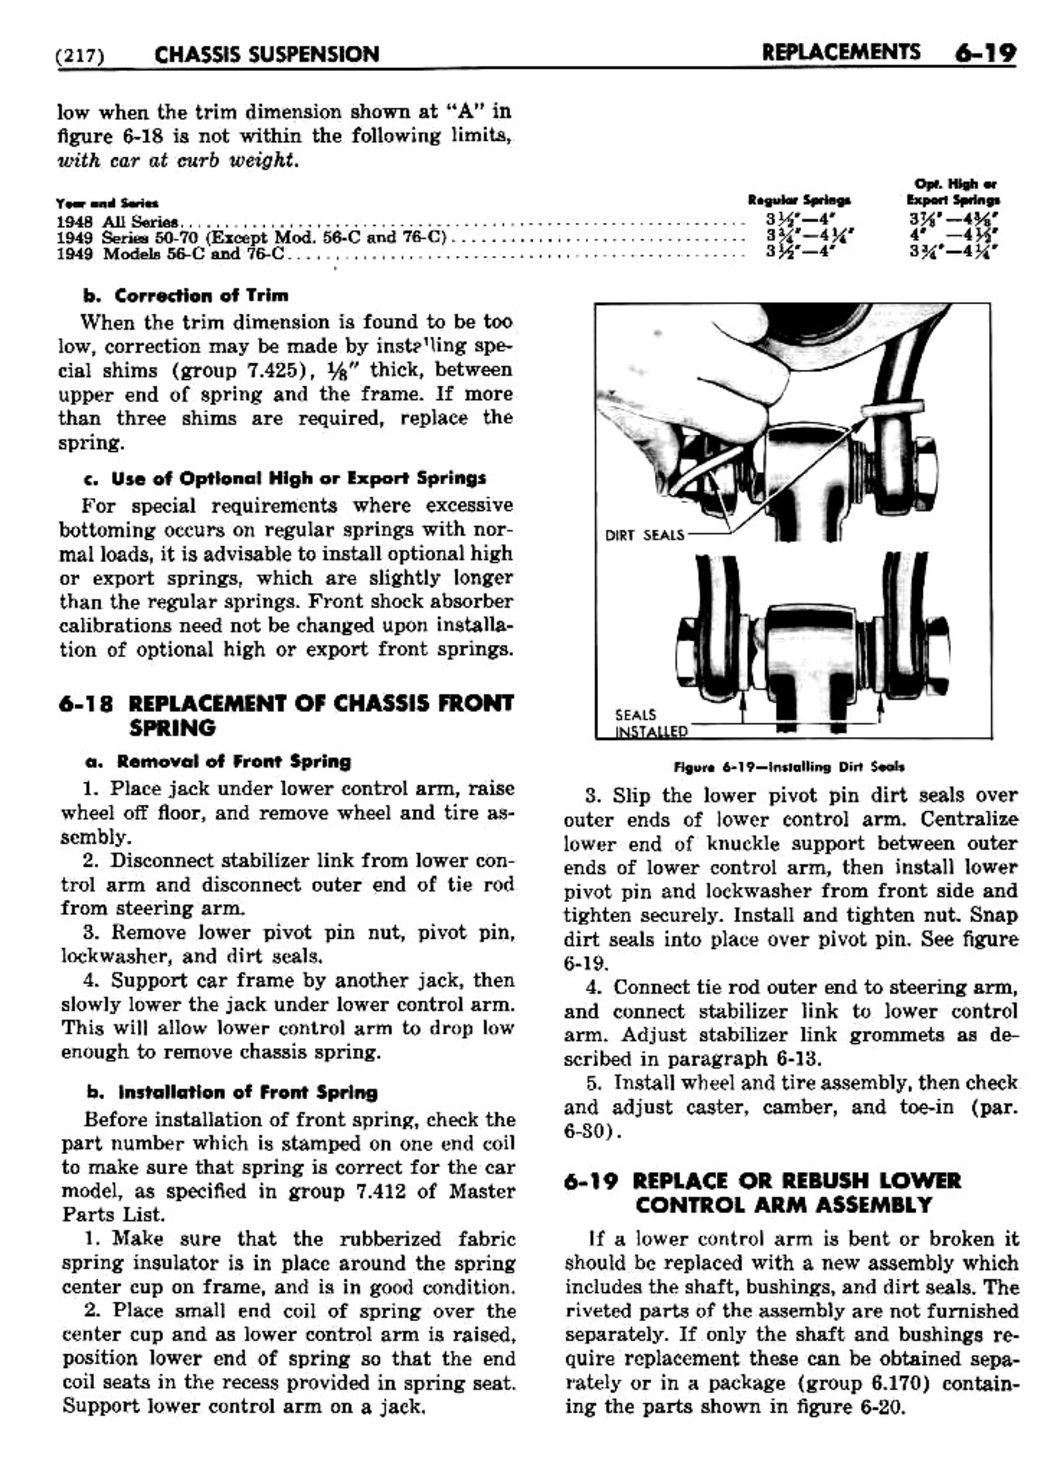 n_07 1948 Buick Shop Manual - Chassis Suspension-019-019.jpg